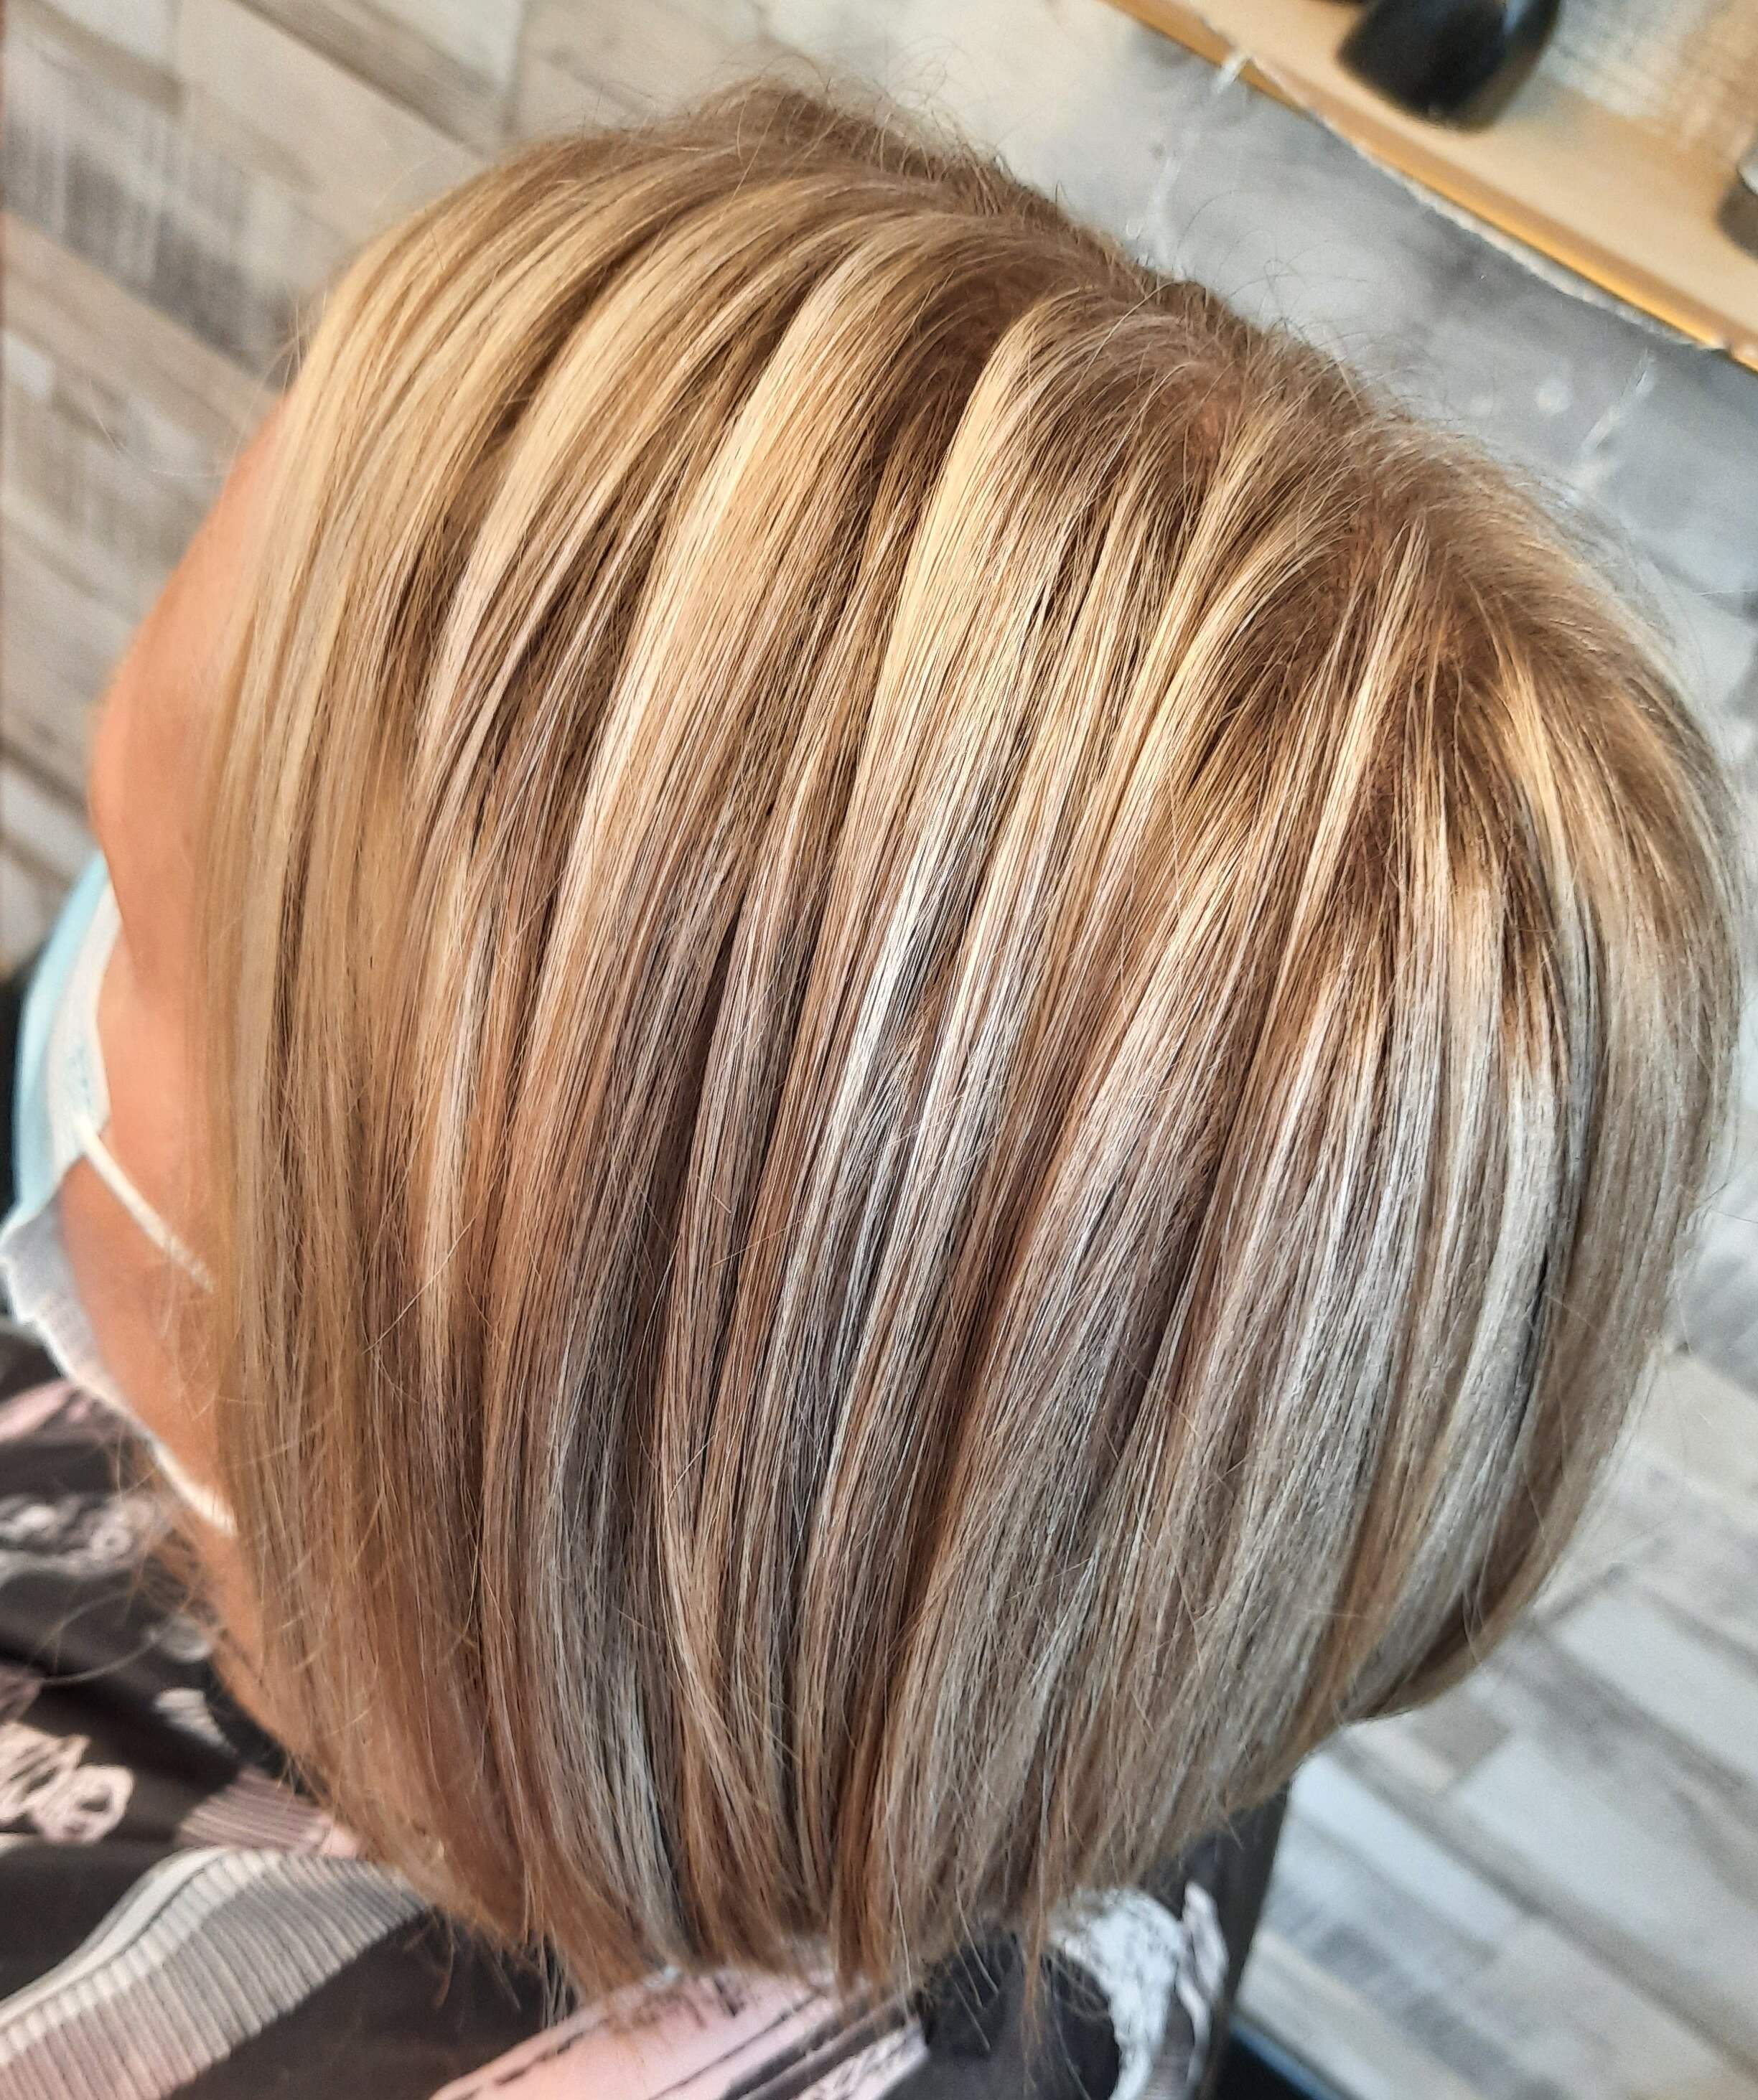 using Slicing technique to create this beautiful hair